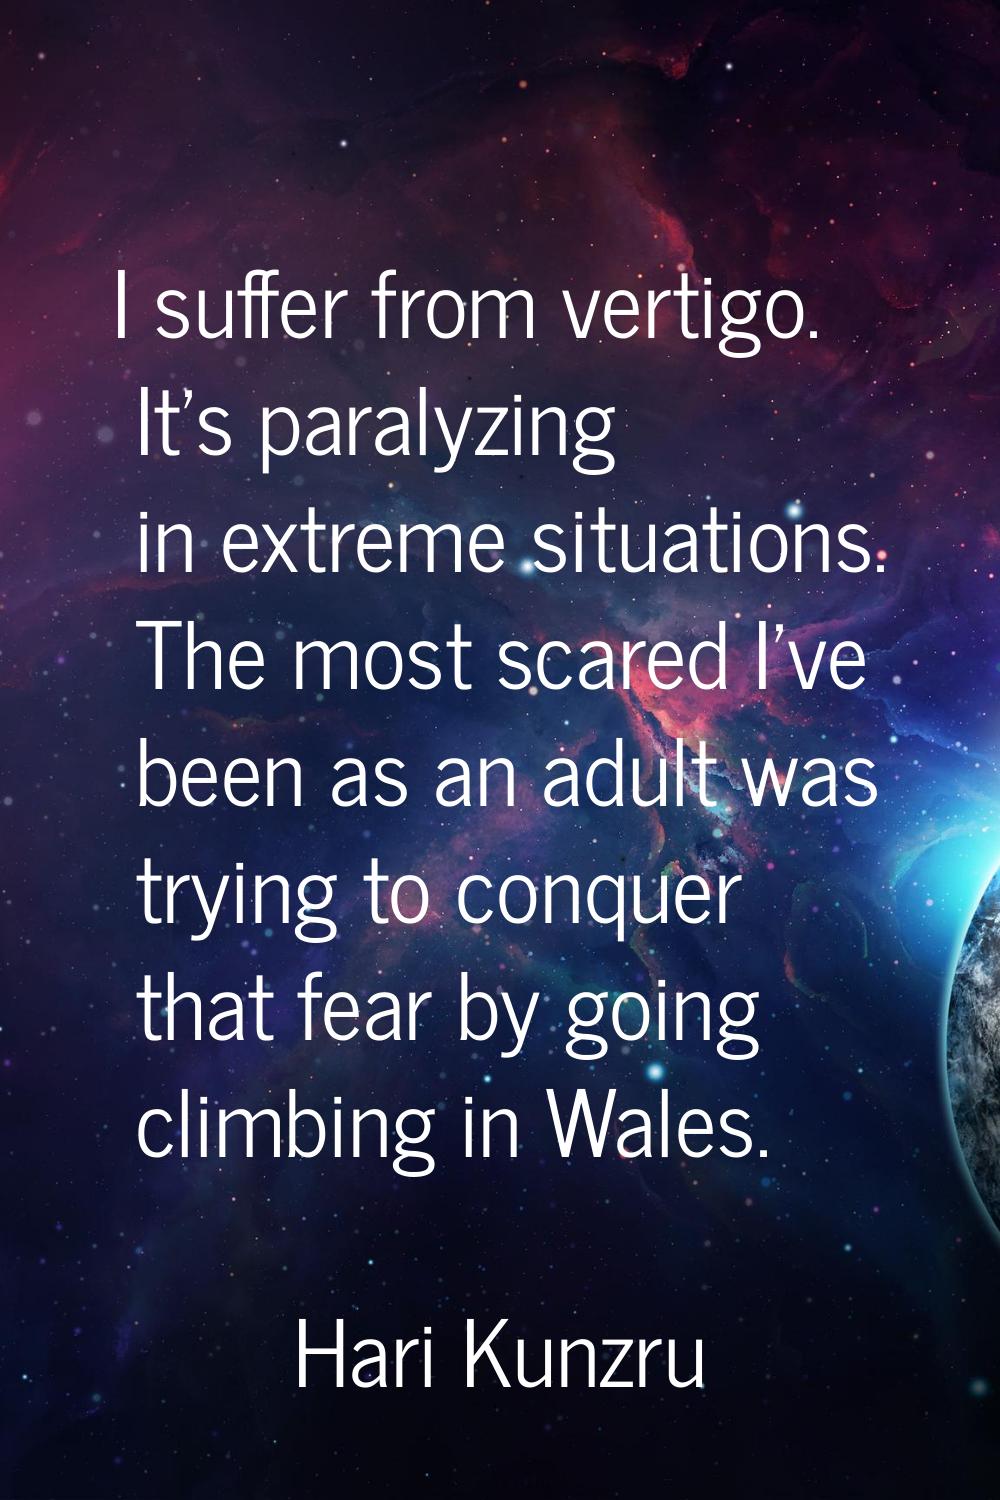 I suffer from vertigo. It's paralyzing in extreme situations. The most scared I've been as an adult